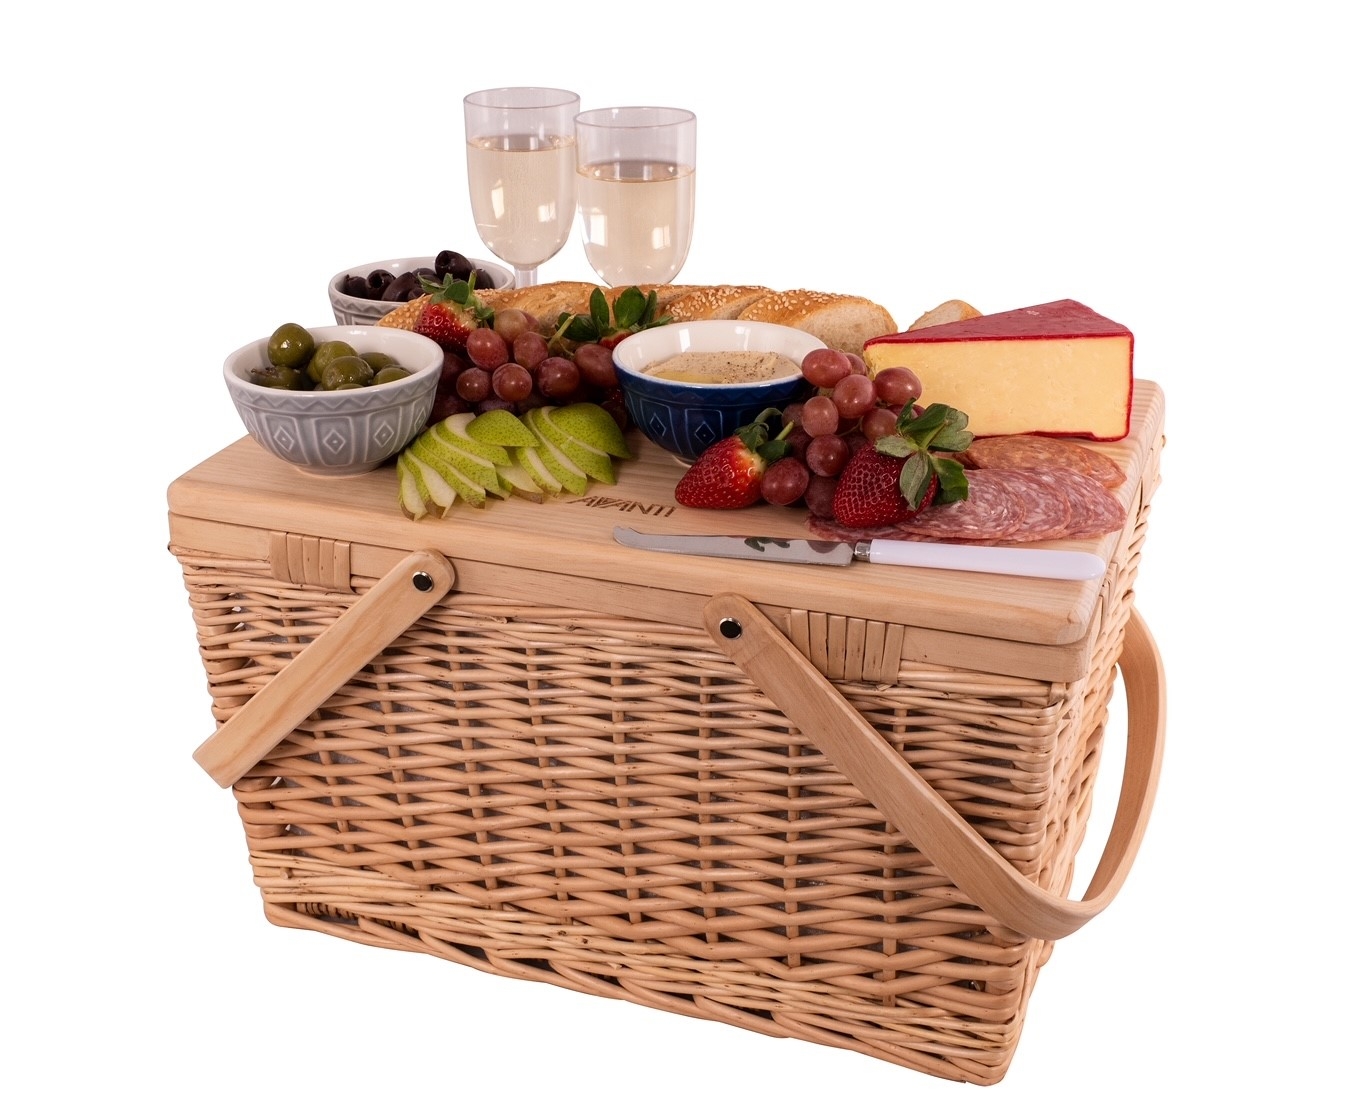 Avanti Picnic basket 4 person pine table top insulated